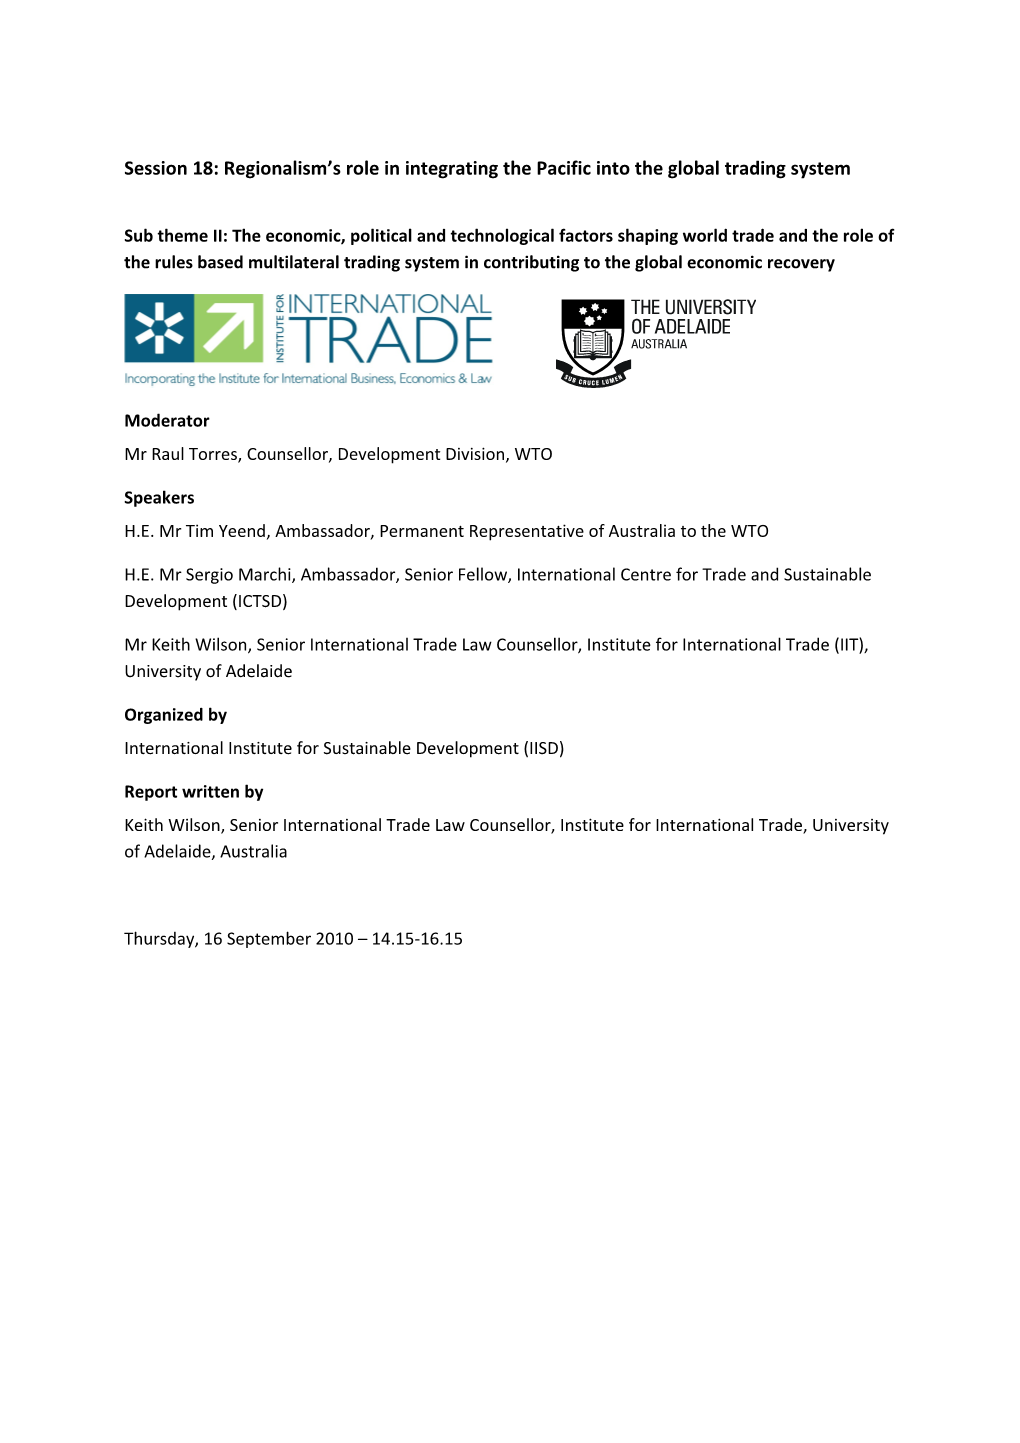 Session 18: Regionalism S Role in Integrating the Pacific Into the Global Trading System